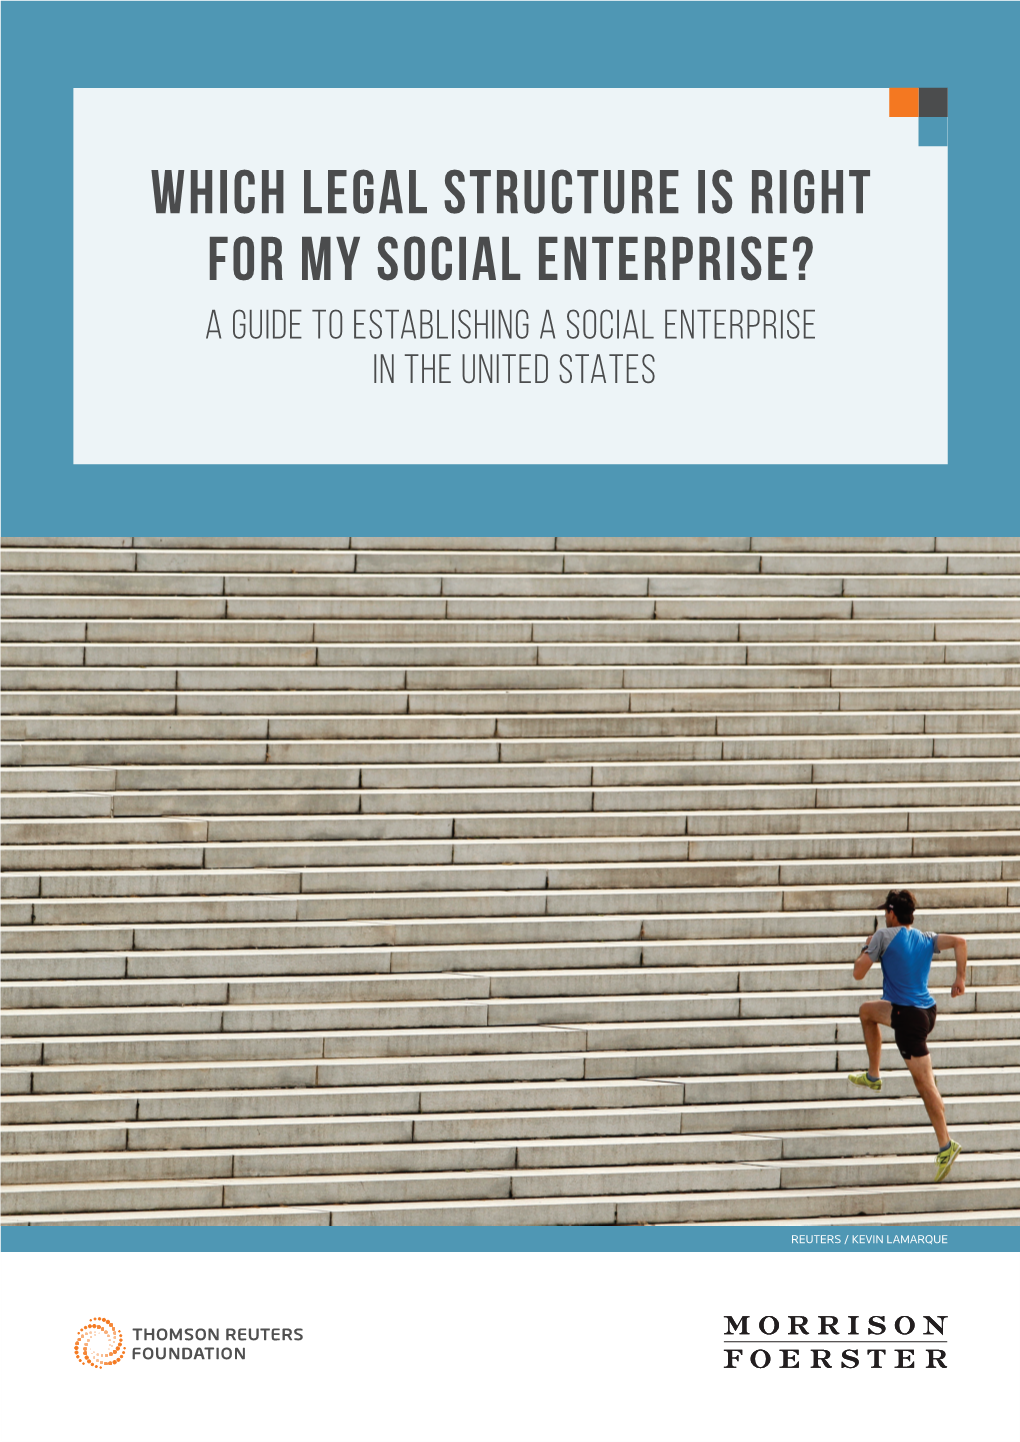 Which Legal Structure Is Right for My Social Enterprise? a Guide to Establishing a Social Enterprise in the United States